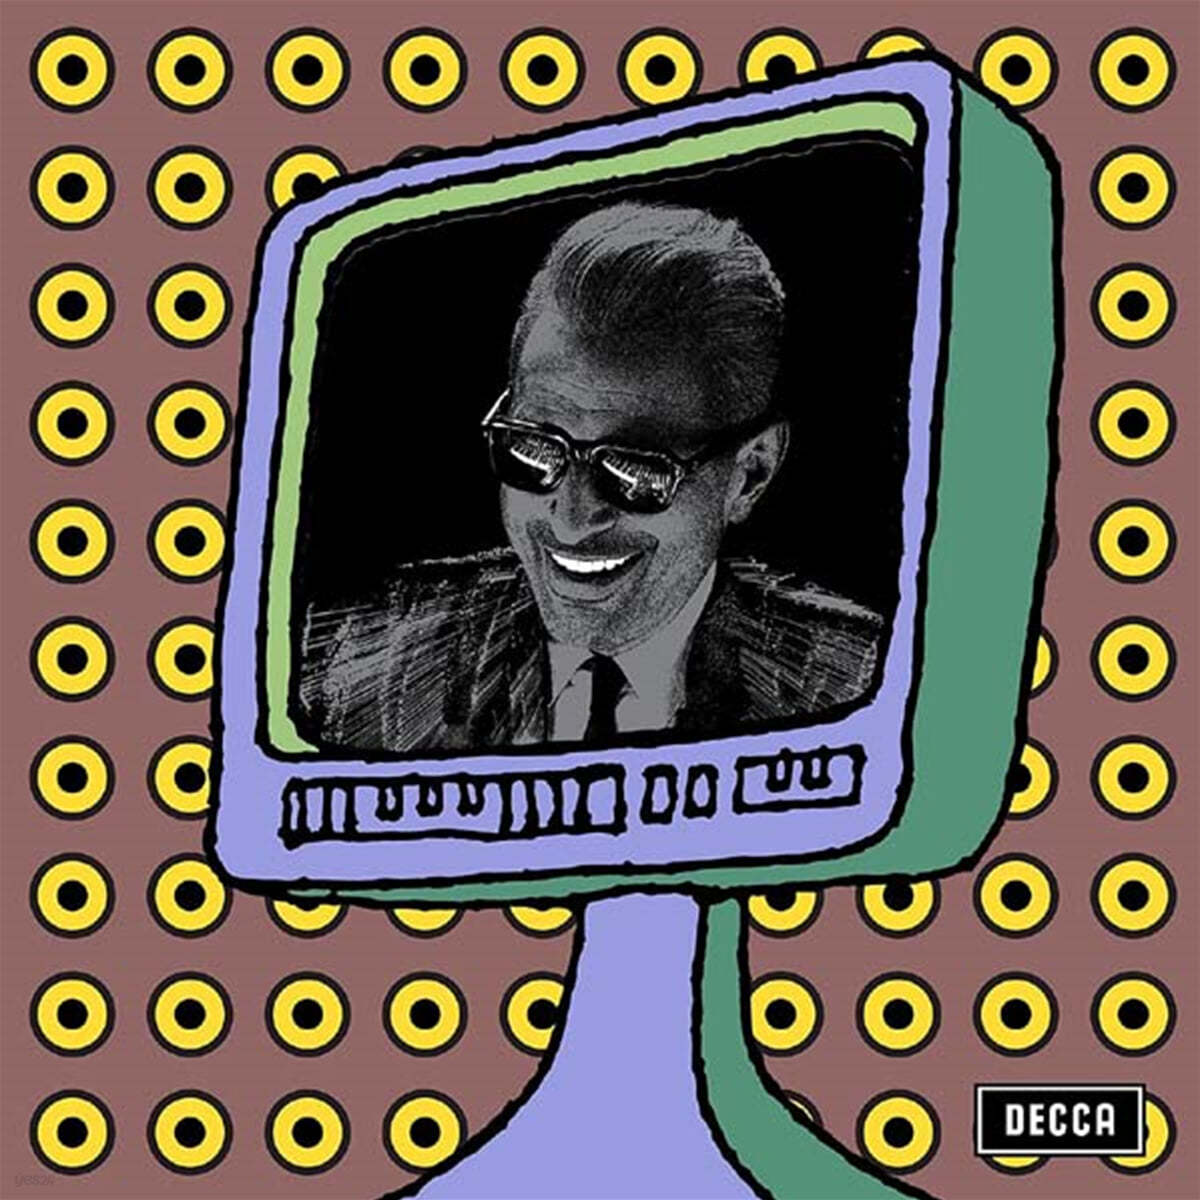 Jeff Goldblum & The Mildred Snitzer Orchestra (제프 골드브럼 & 밀드레드 스니처 오케스트라) - Plays Well With Others [LP]